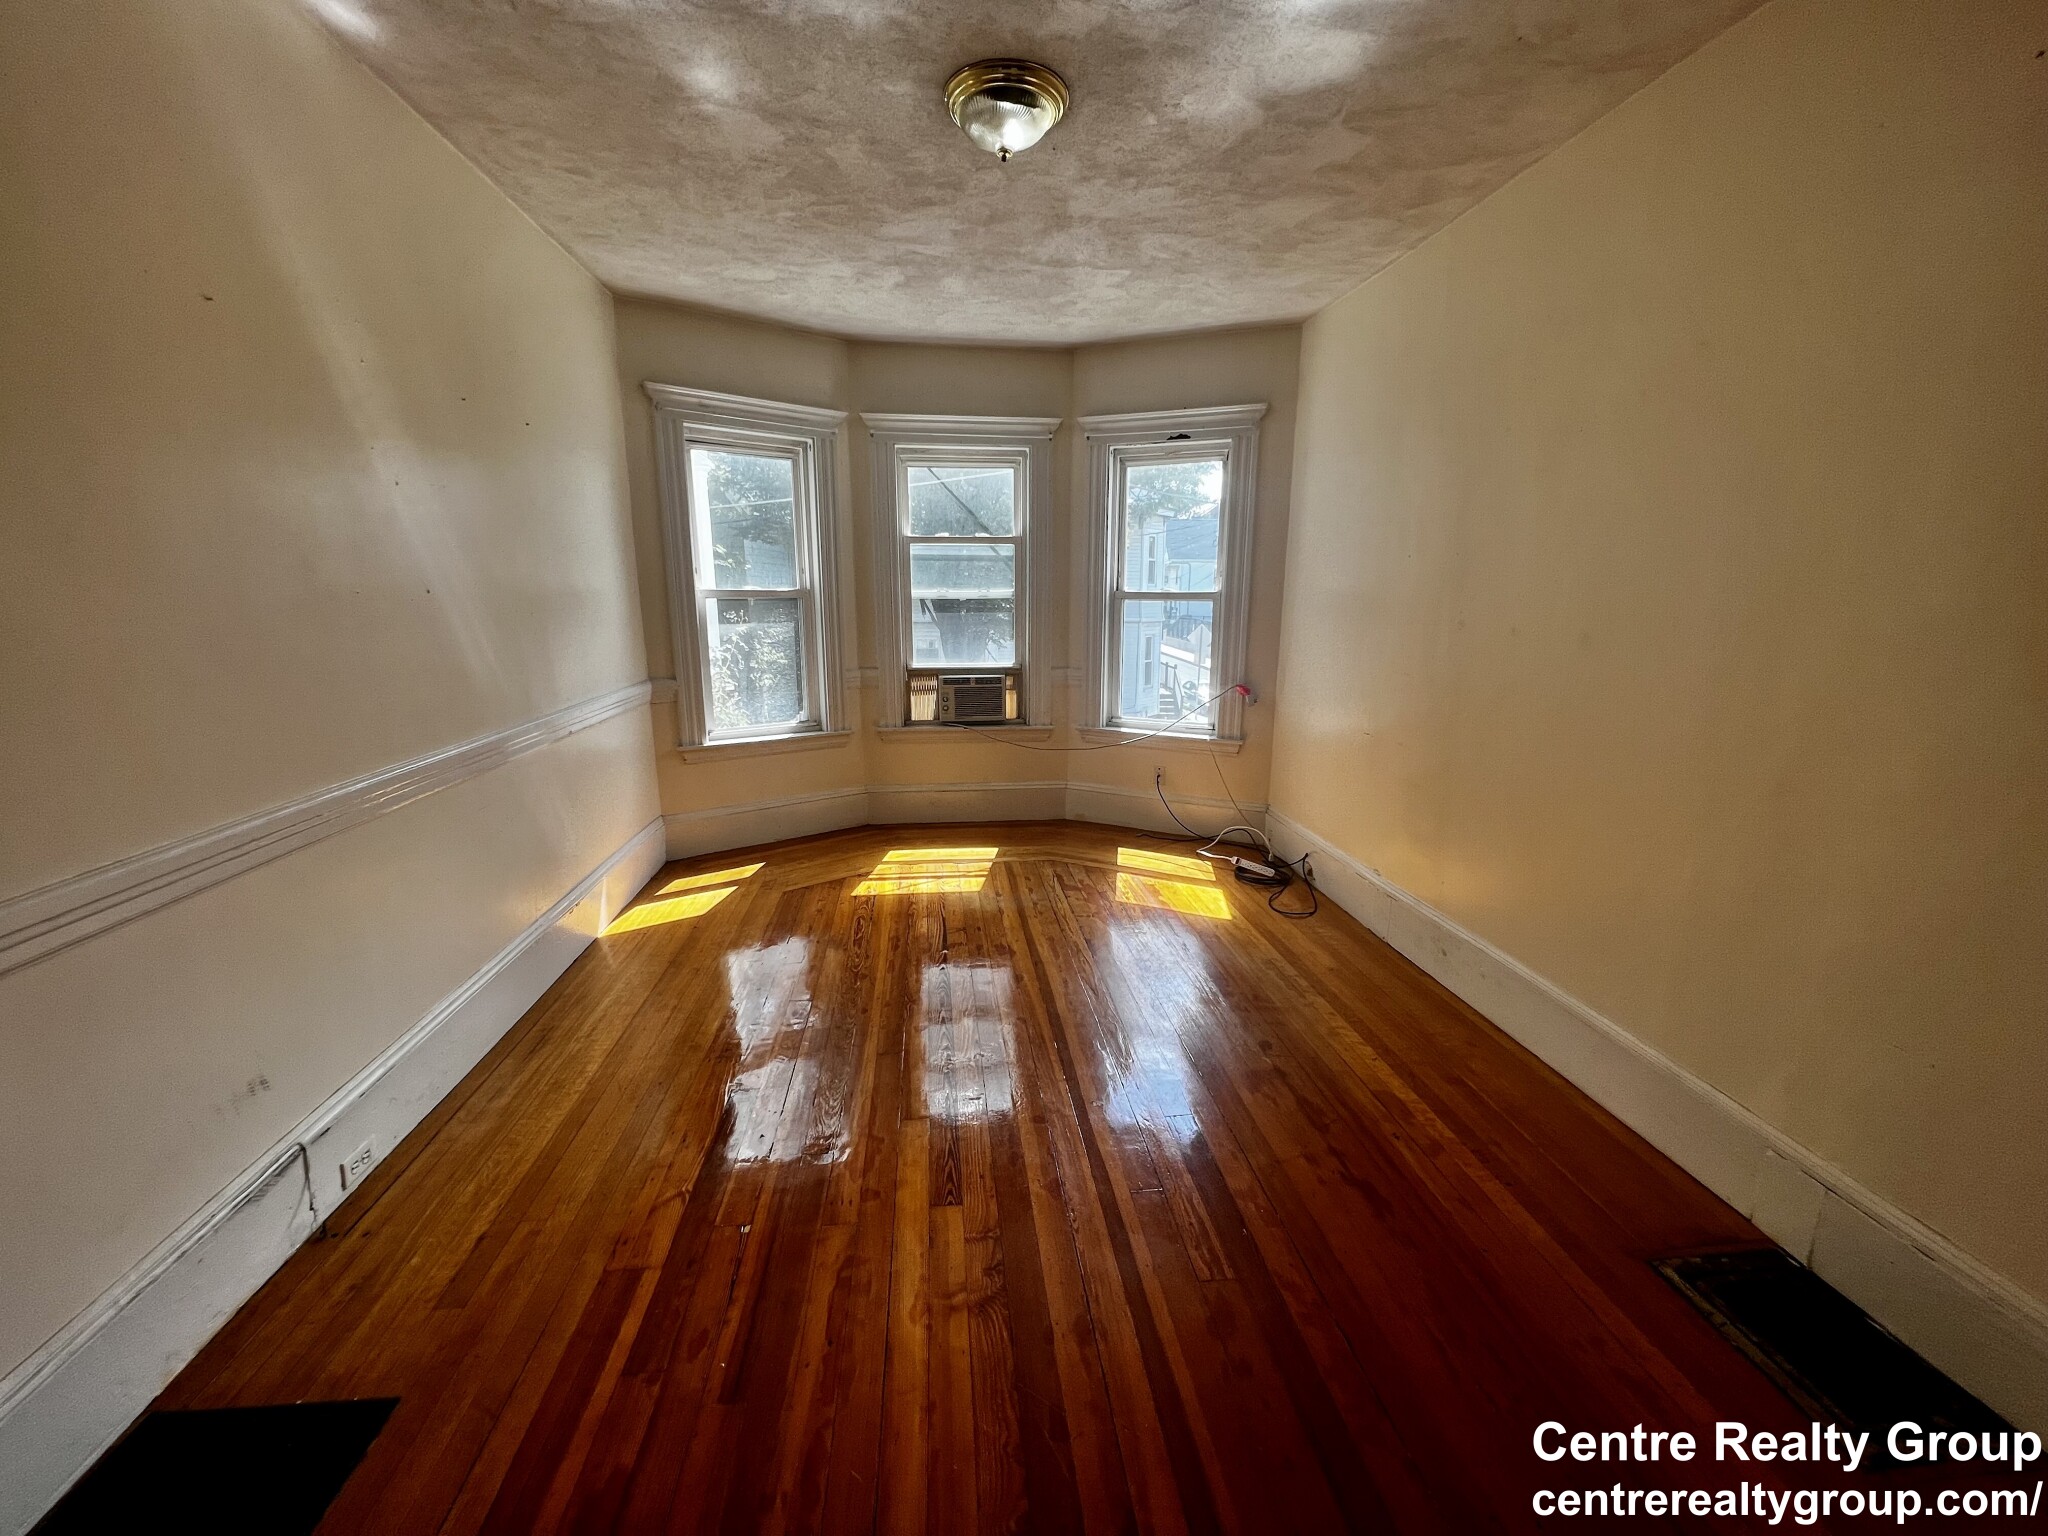 Photos of apartment on Sycamore St.,Somerville MA 02145